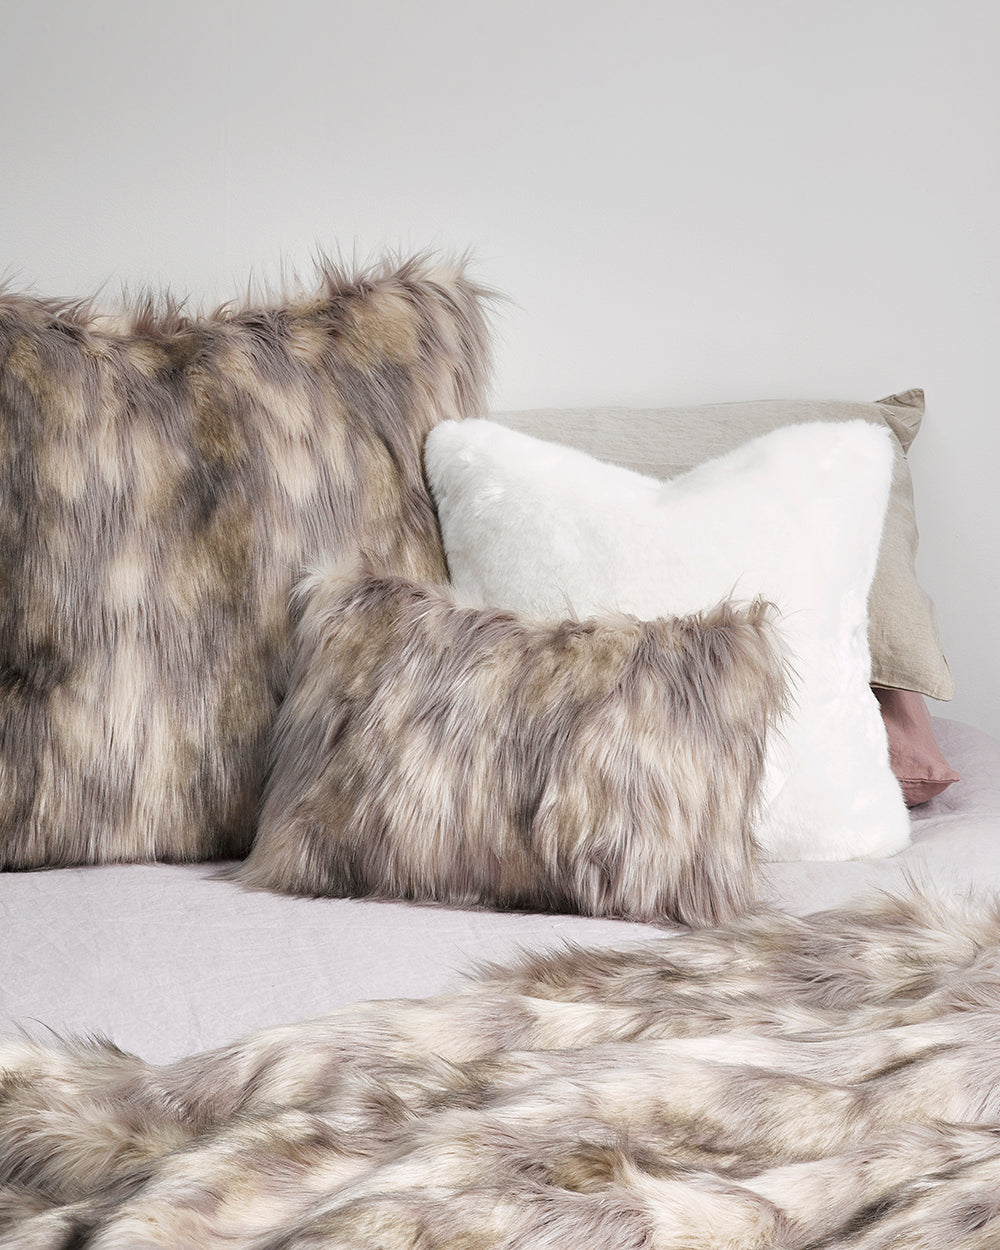 Heirloom Mountain Hare Cushions in Faux Fur are available from Make Your House A Home Premium Stockist. Furniture Store Bendigo, Victoria. Australia Wide Delivery. Furtex Baya.